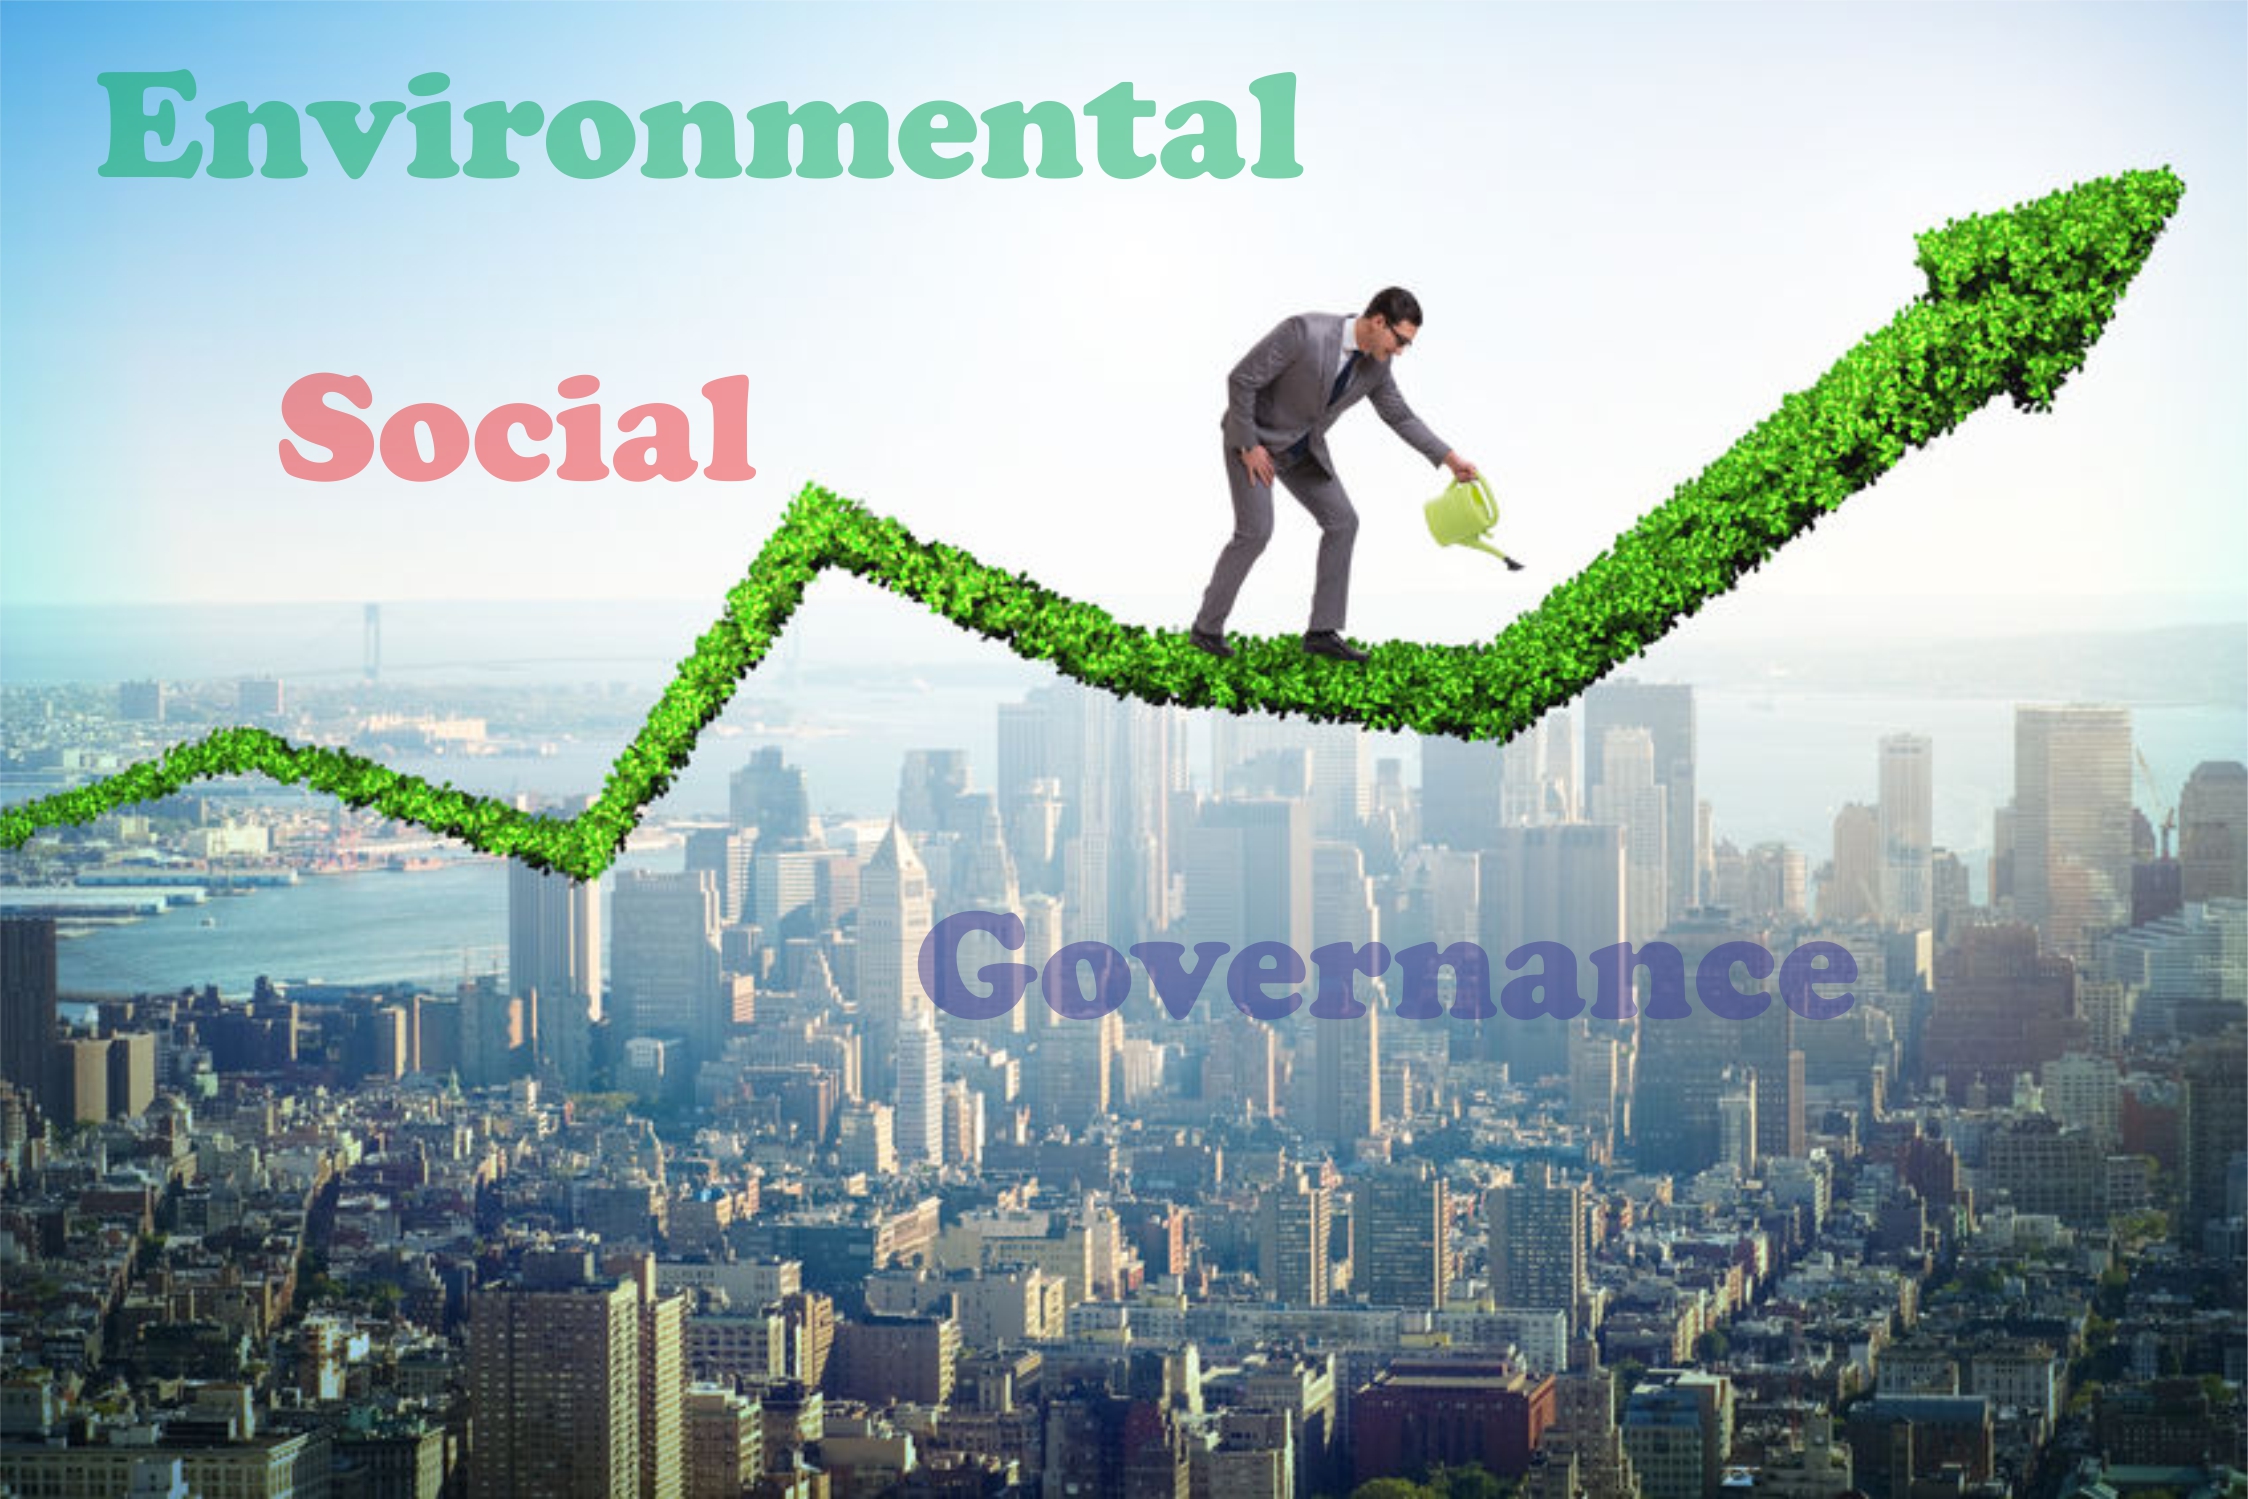 "ESG" Investing: Politics by Other Means